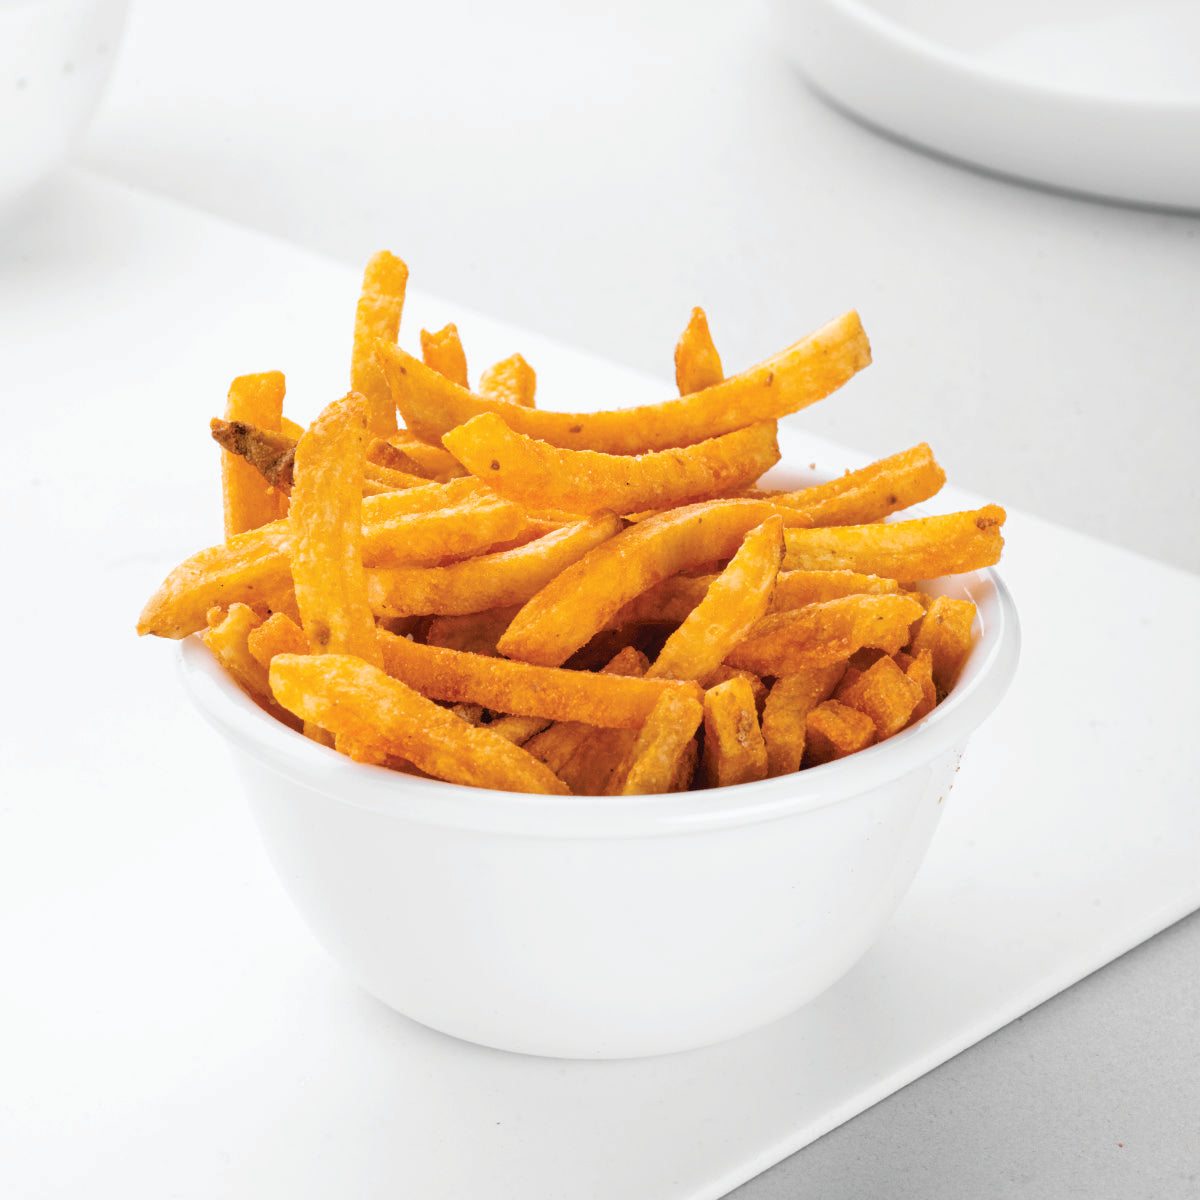 French Fries Cheese